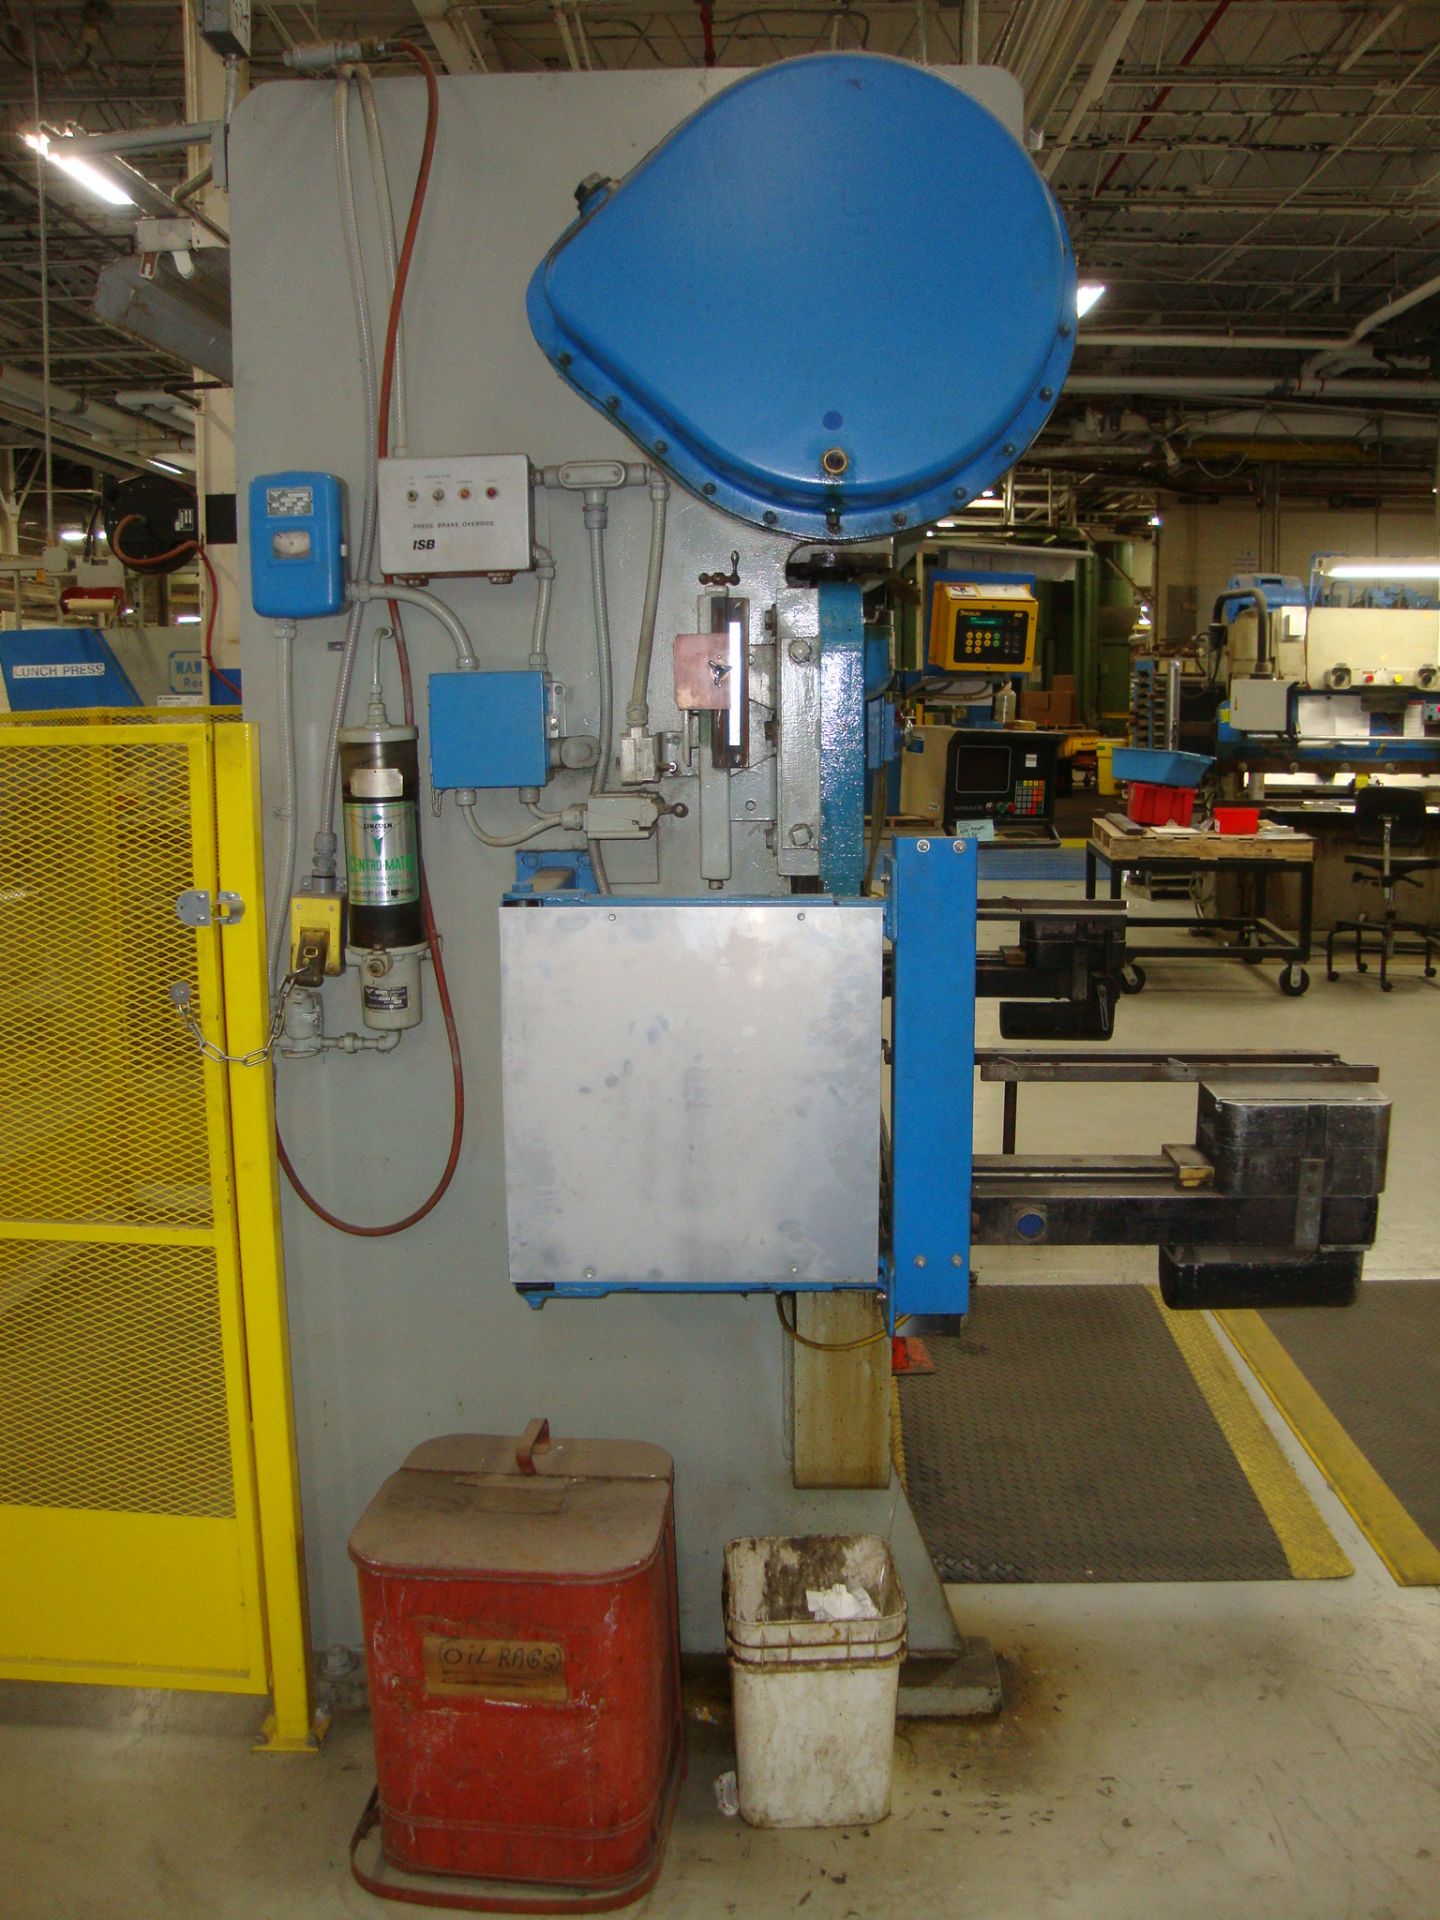 Verson 65 Ton 8' Press Versomatic w/Merlin Safety System, Serial # 22691-206.65, approx. 132" x - Image 29 of 57